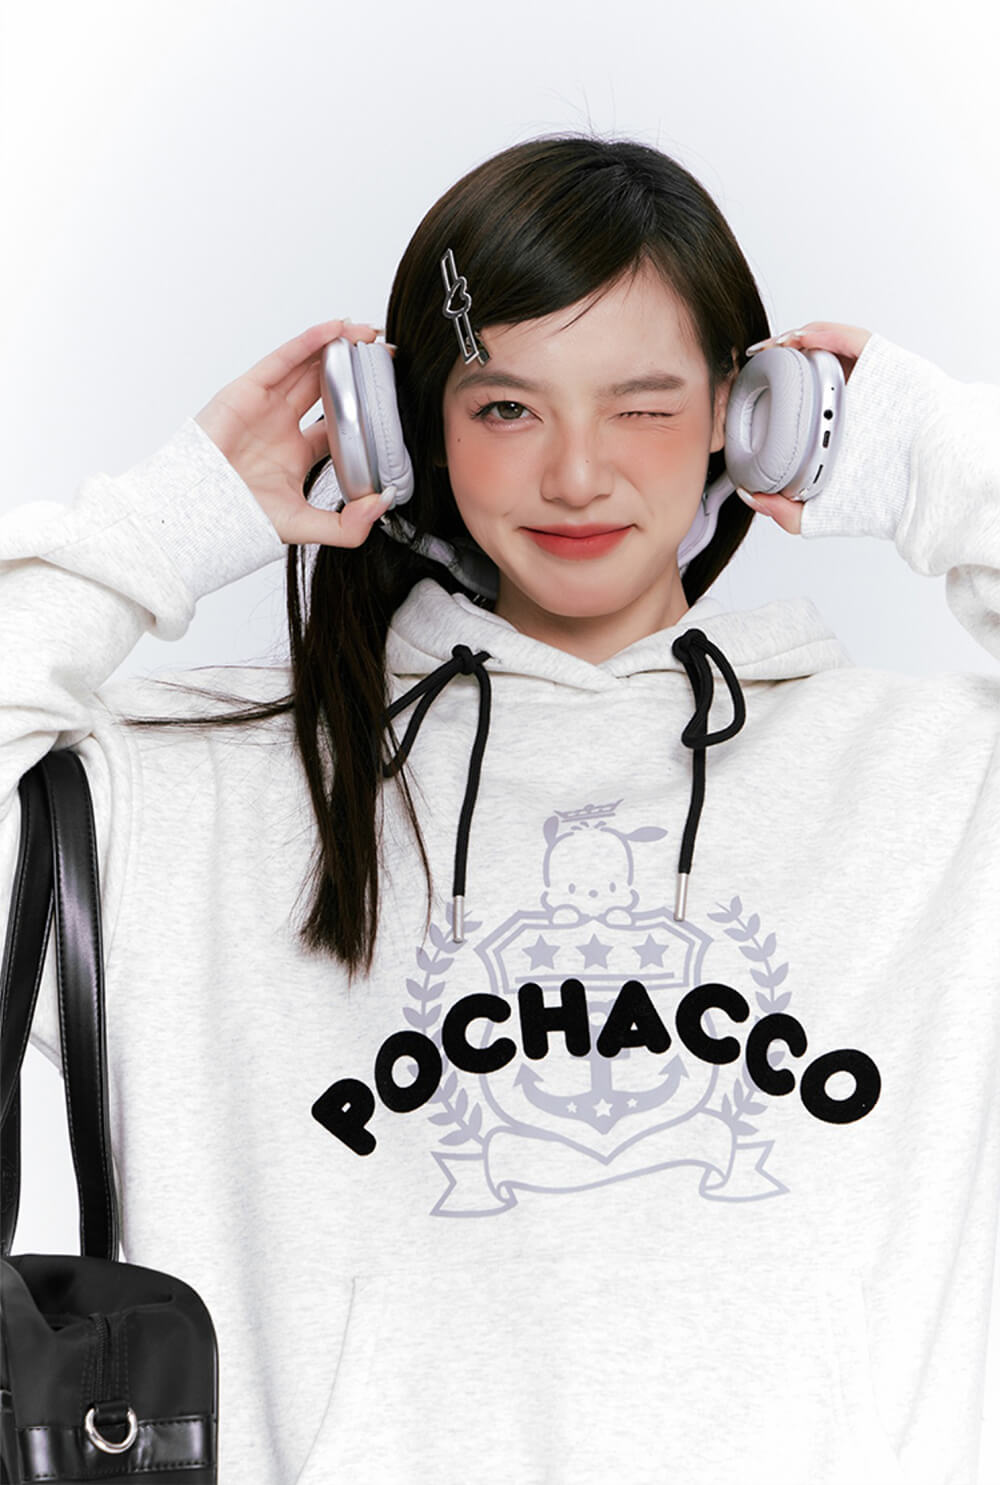 Japanese-girl-fashion-preppy-look-styled-by-pochacco-letters-hoodie